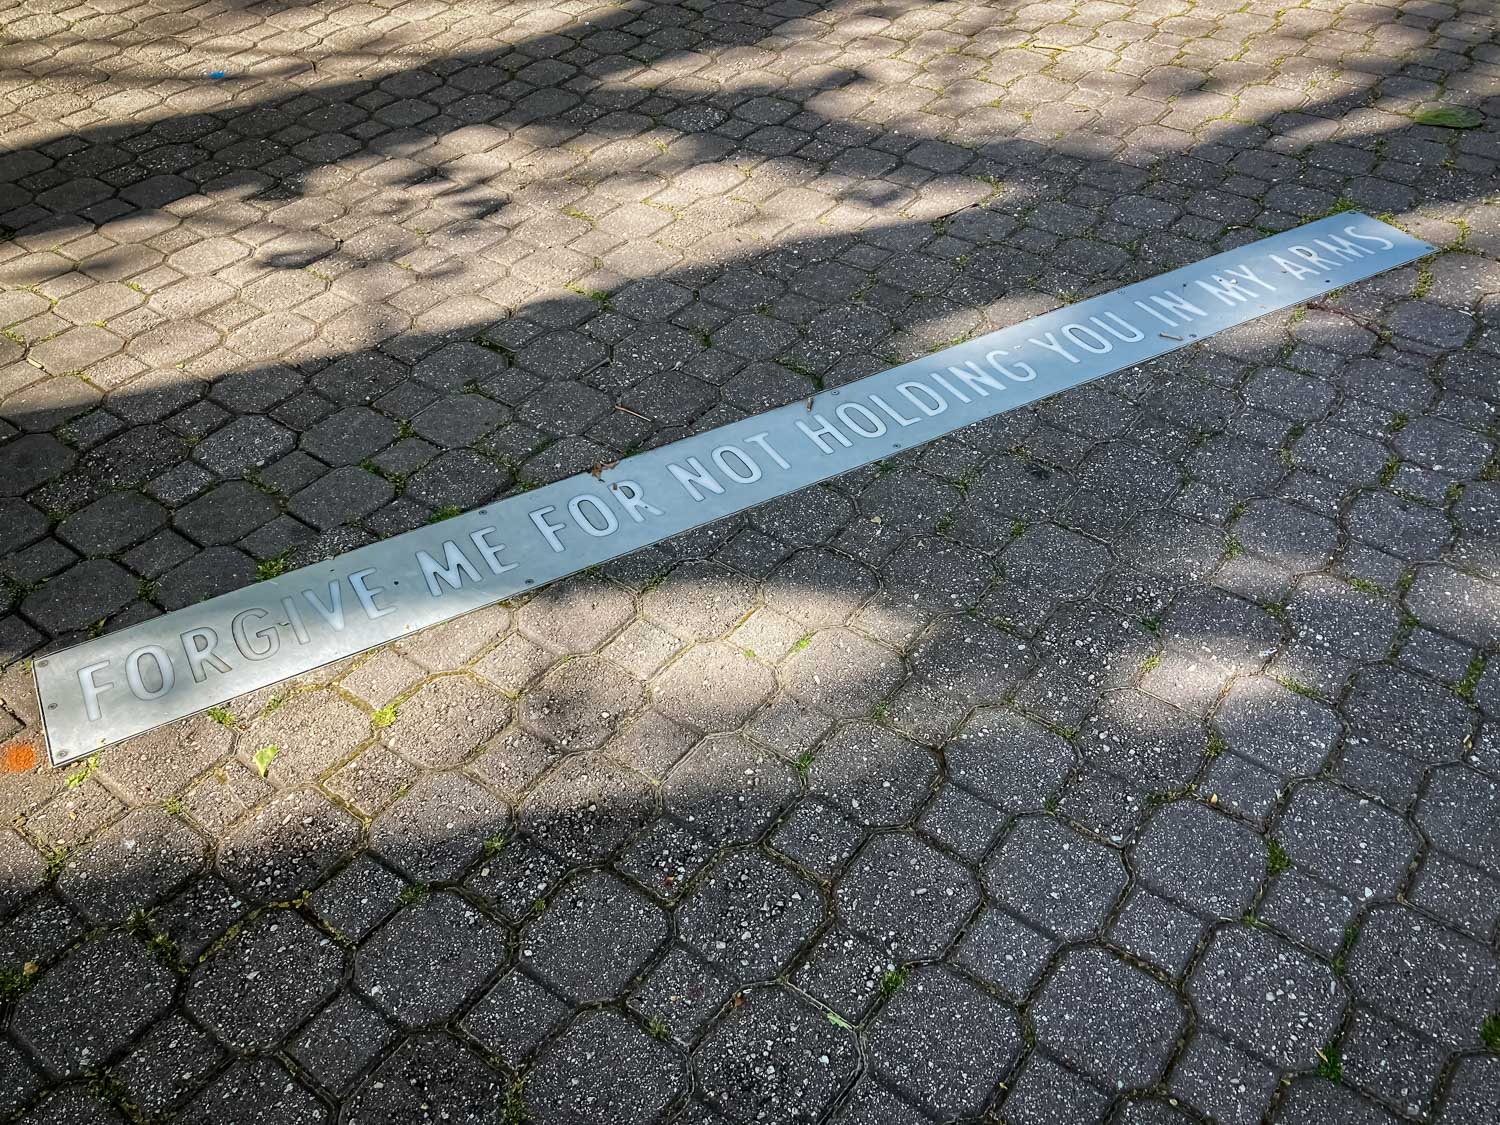 A strip of text across a tiled pavement bearing the words "Forgive me for not holding you in my arms"